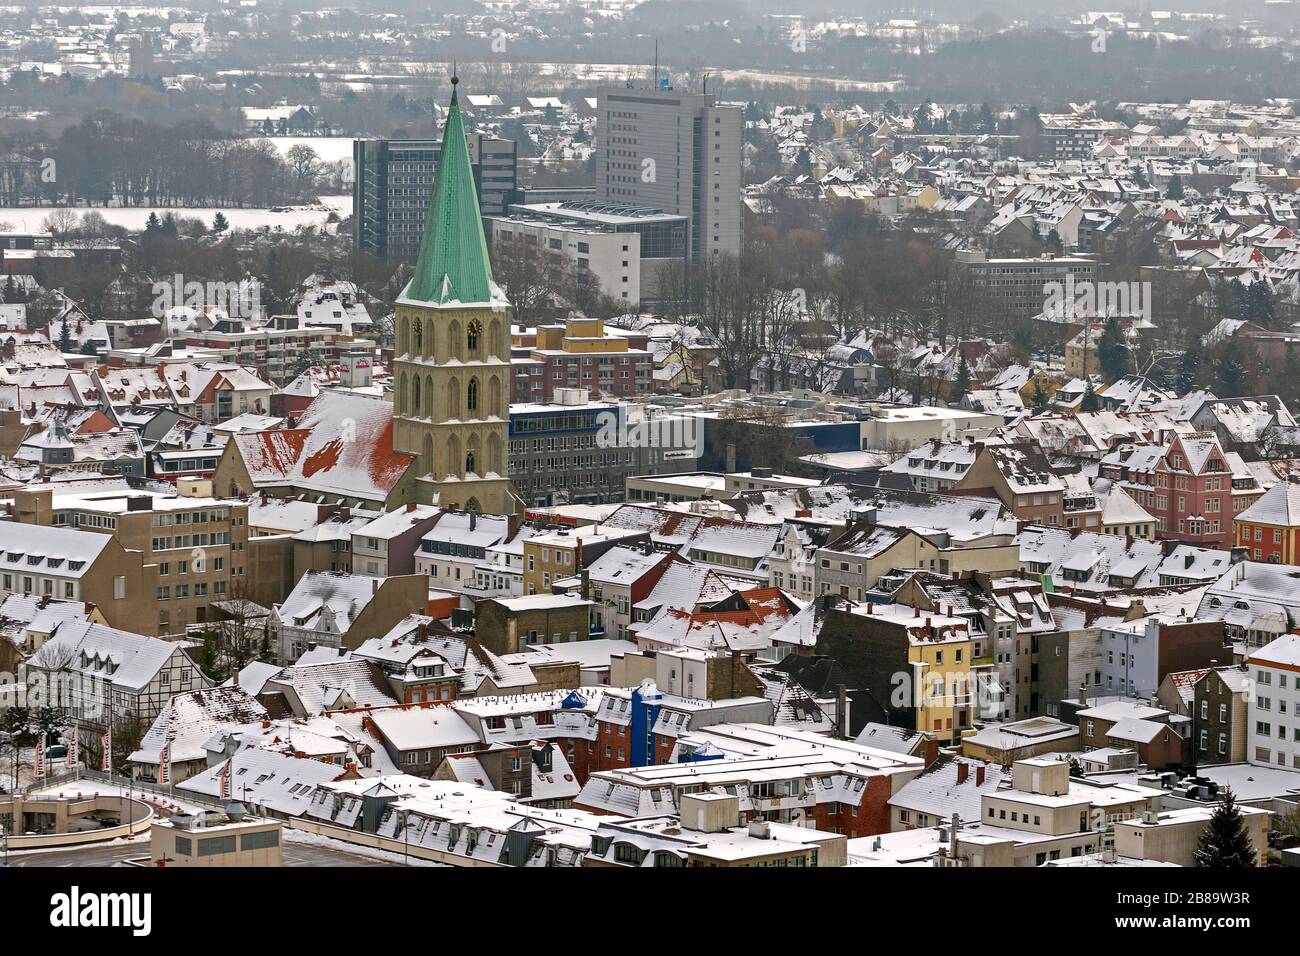 , city centre of Hamm with St Paul's Church, 26.01.2013, aerial view, Germany, North Rhine-Westphalia, Ruhr Area, Hamm Stock Photo